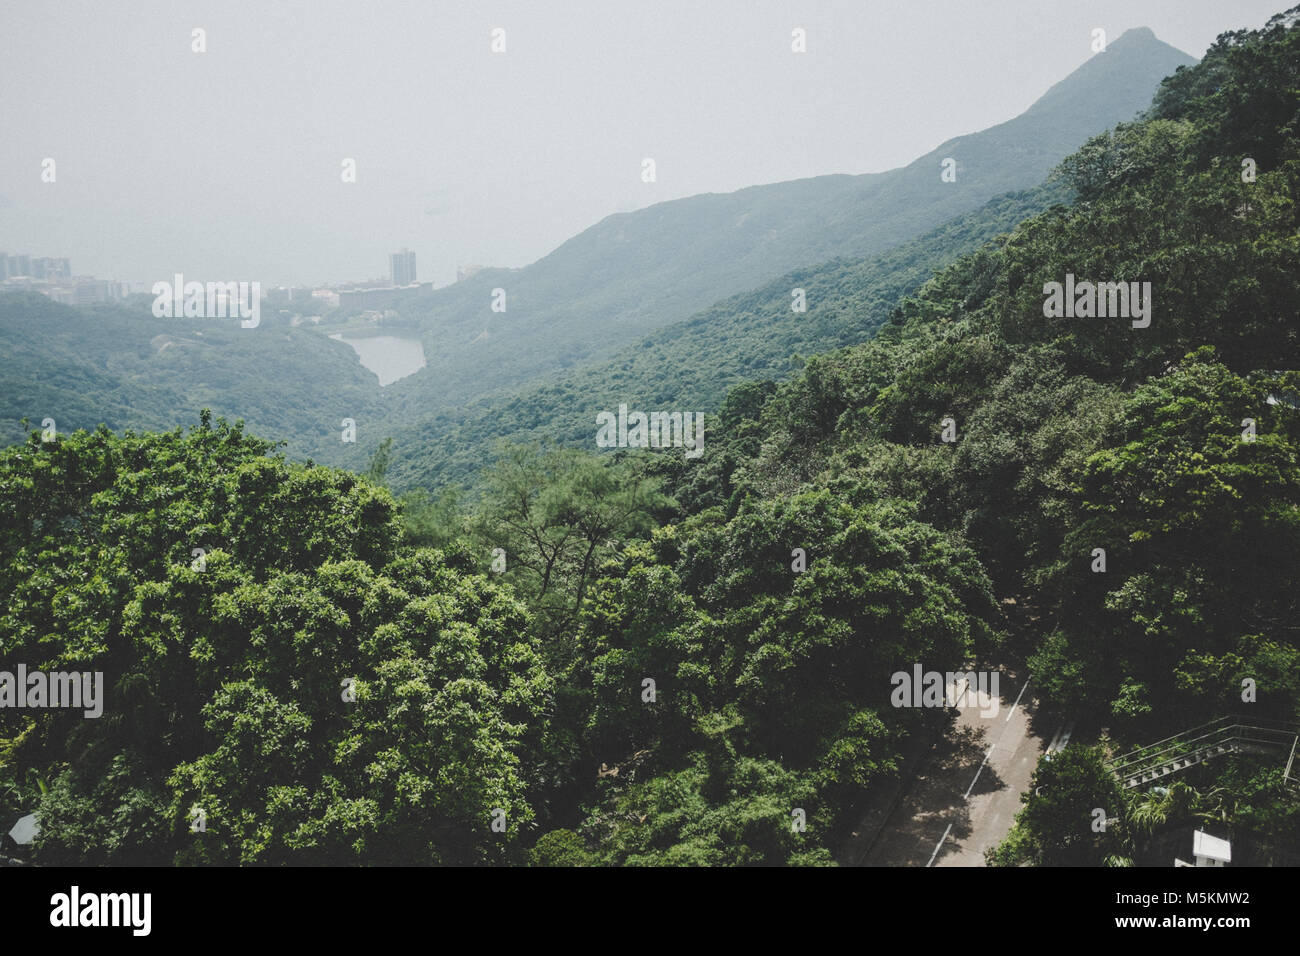 The view from the tourist spot of Victoria Peak across Hong Kong Island Stock Photo